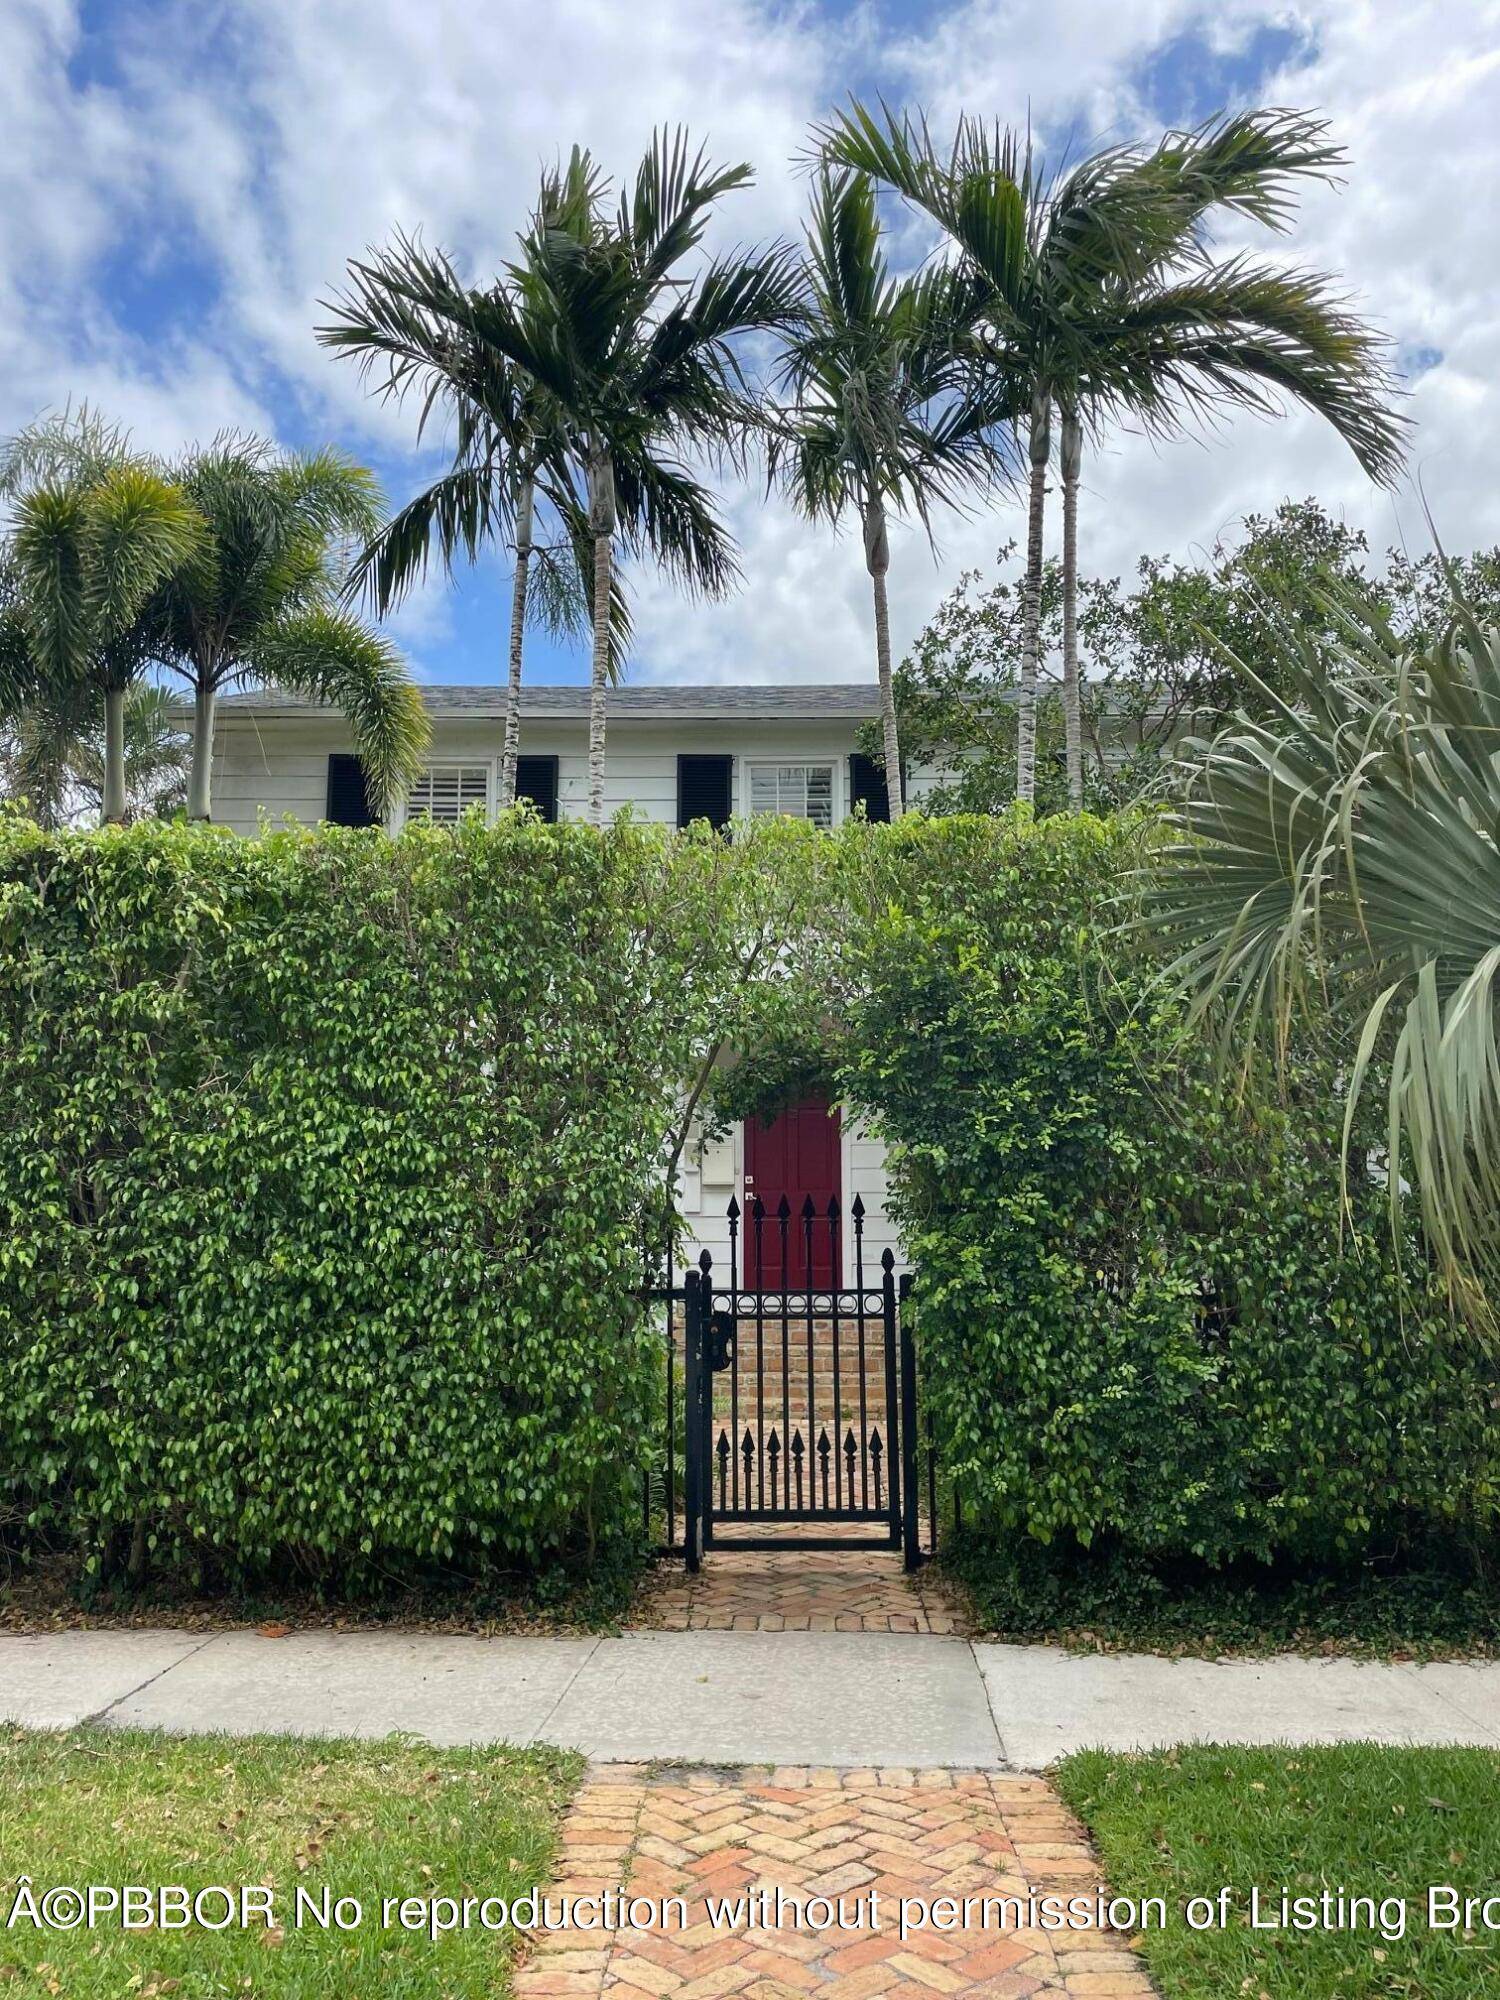 Timeless charm in the heart of West Palm Beach.